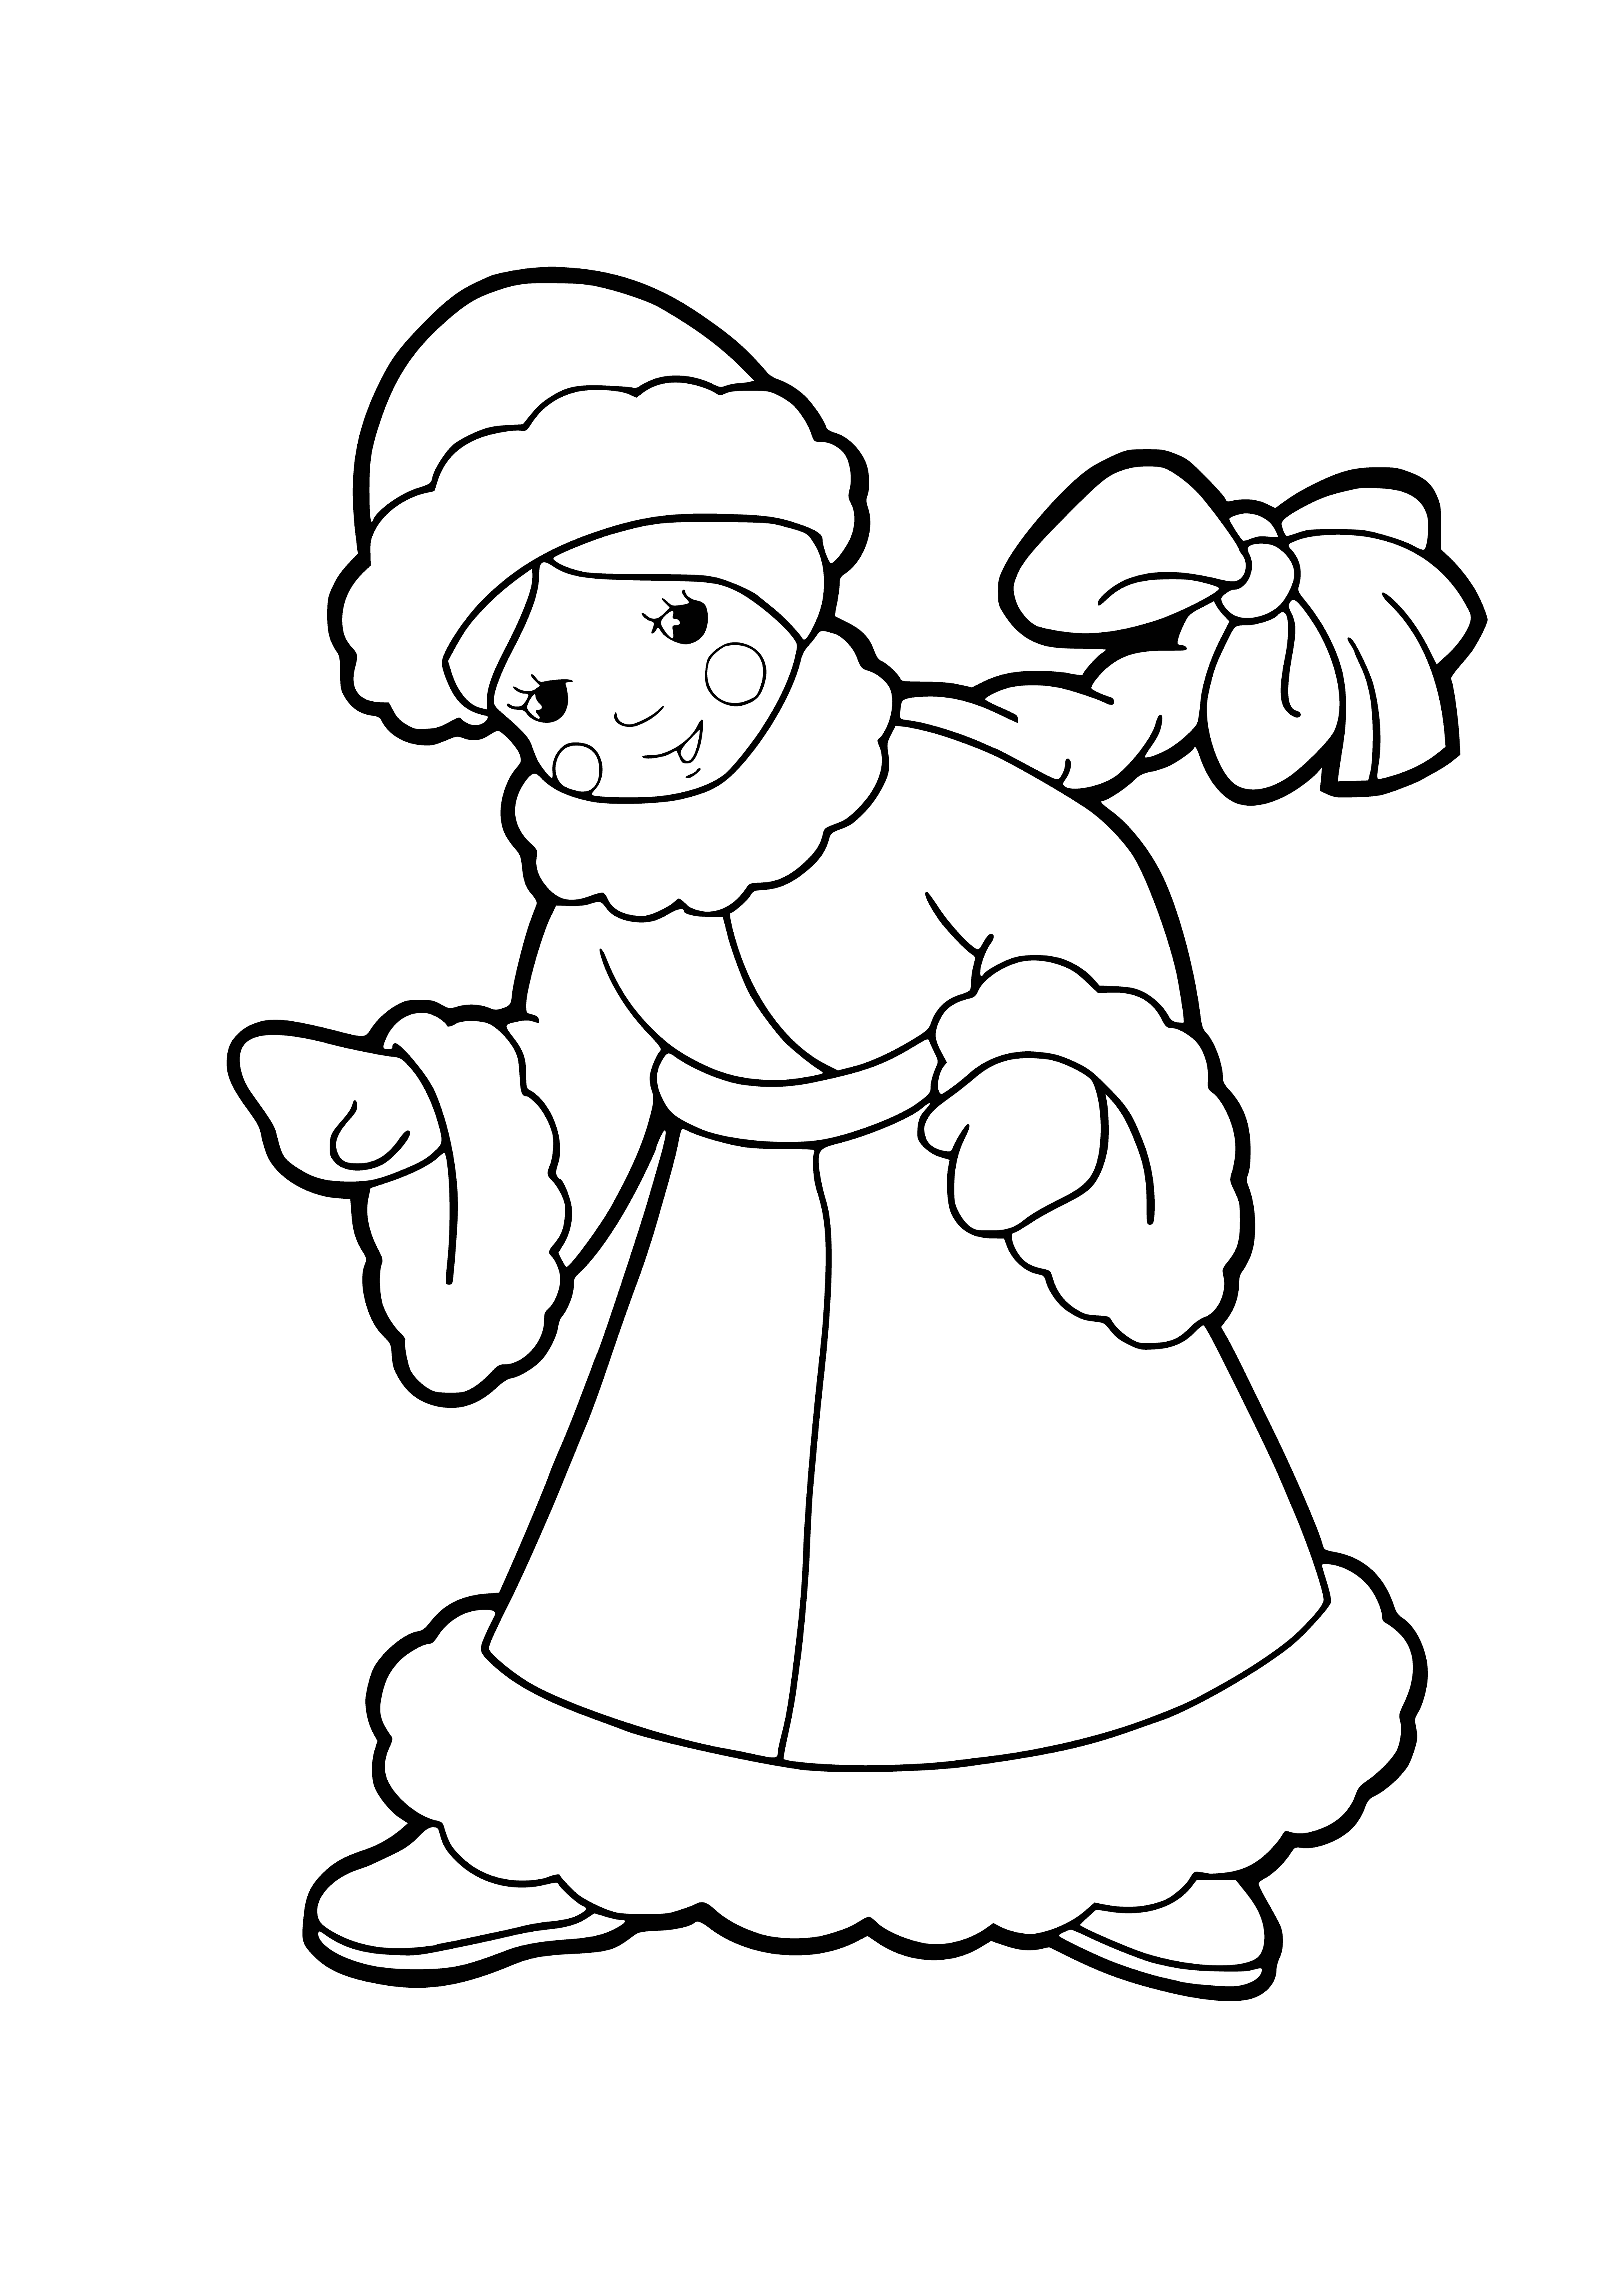 coloring page: Girl in white dress w/ blue belt & shoes. Long white hair & blue eyes. Standing by tree w/ white headband in her hair.